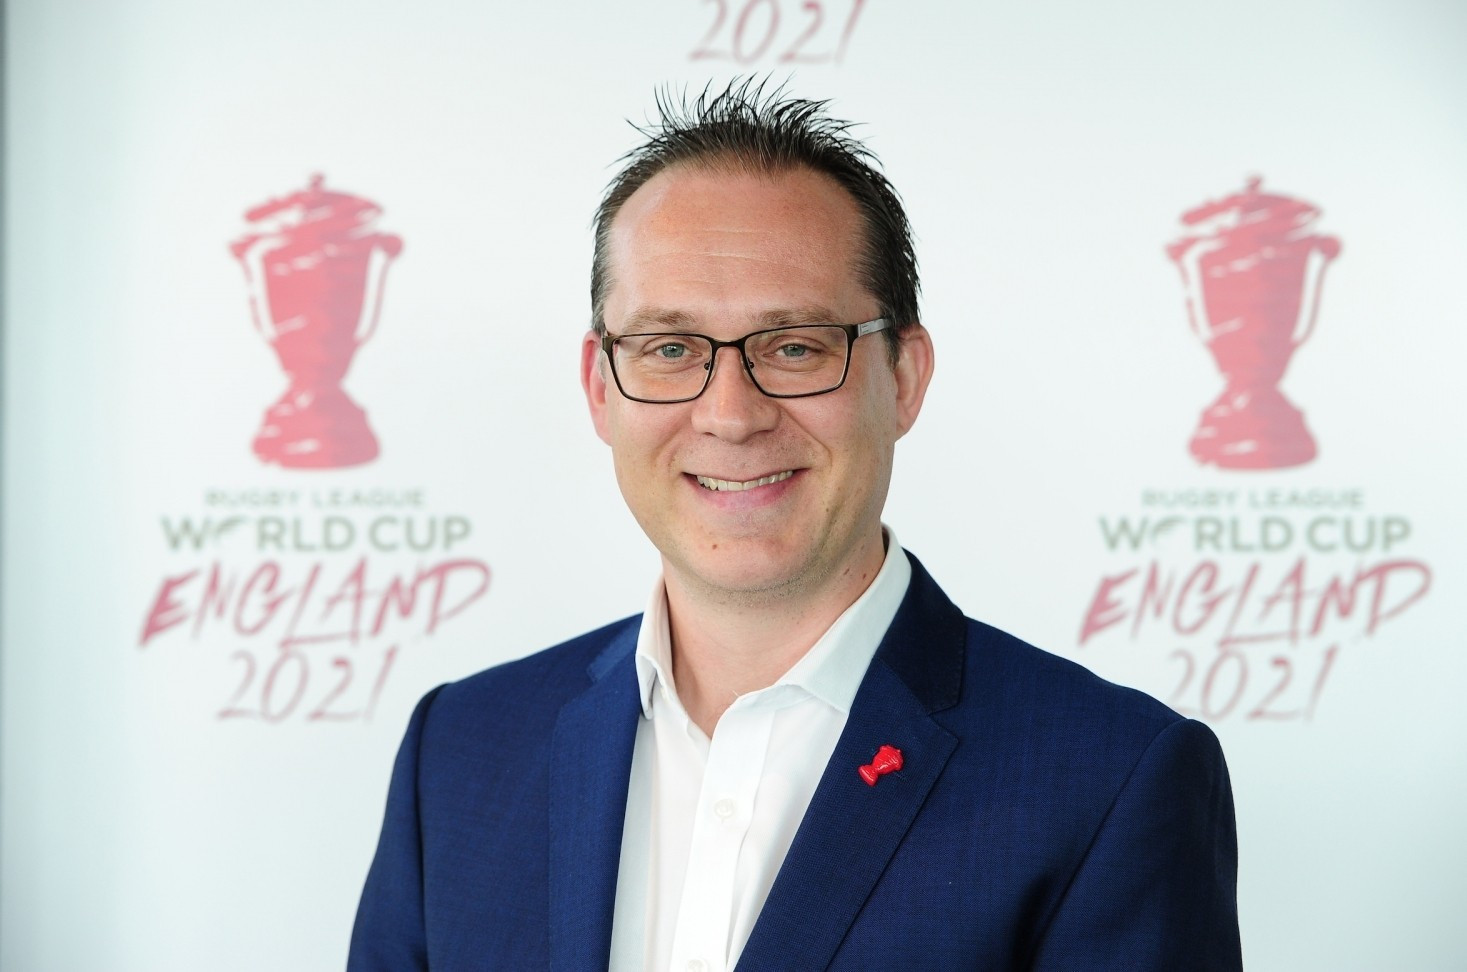 Jon Dutton, chief executive of Rugby League World Cup 2021, has said that they are 